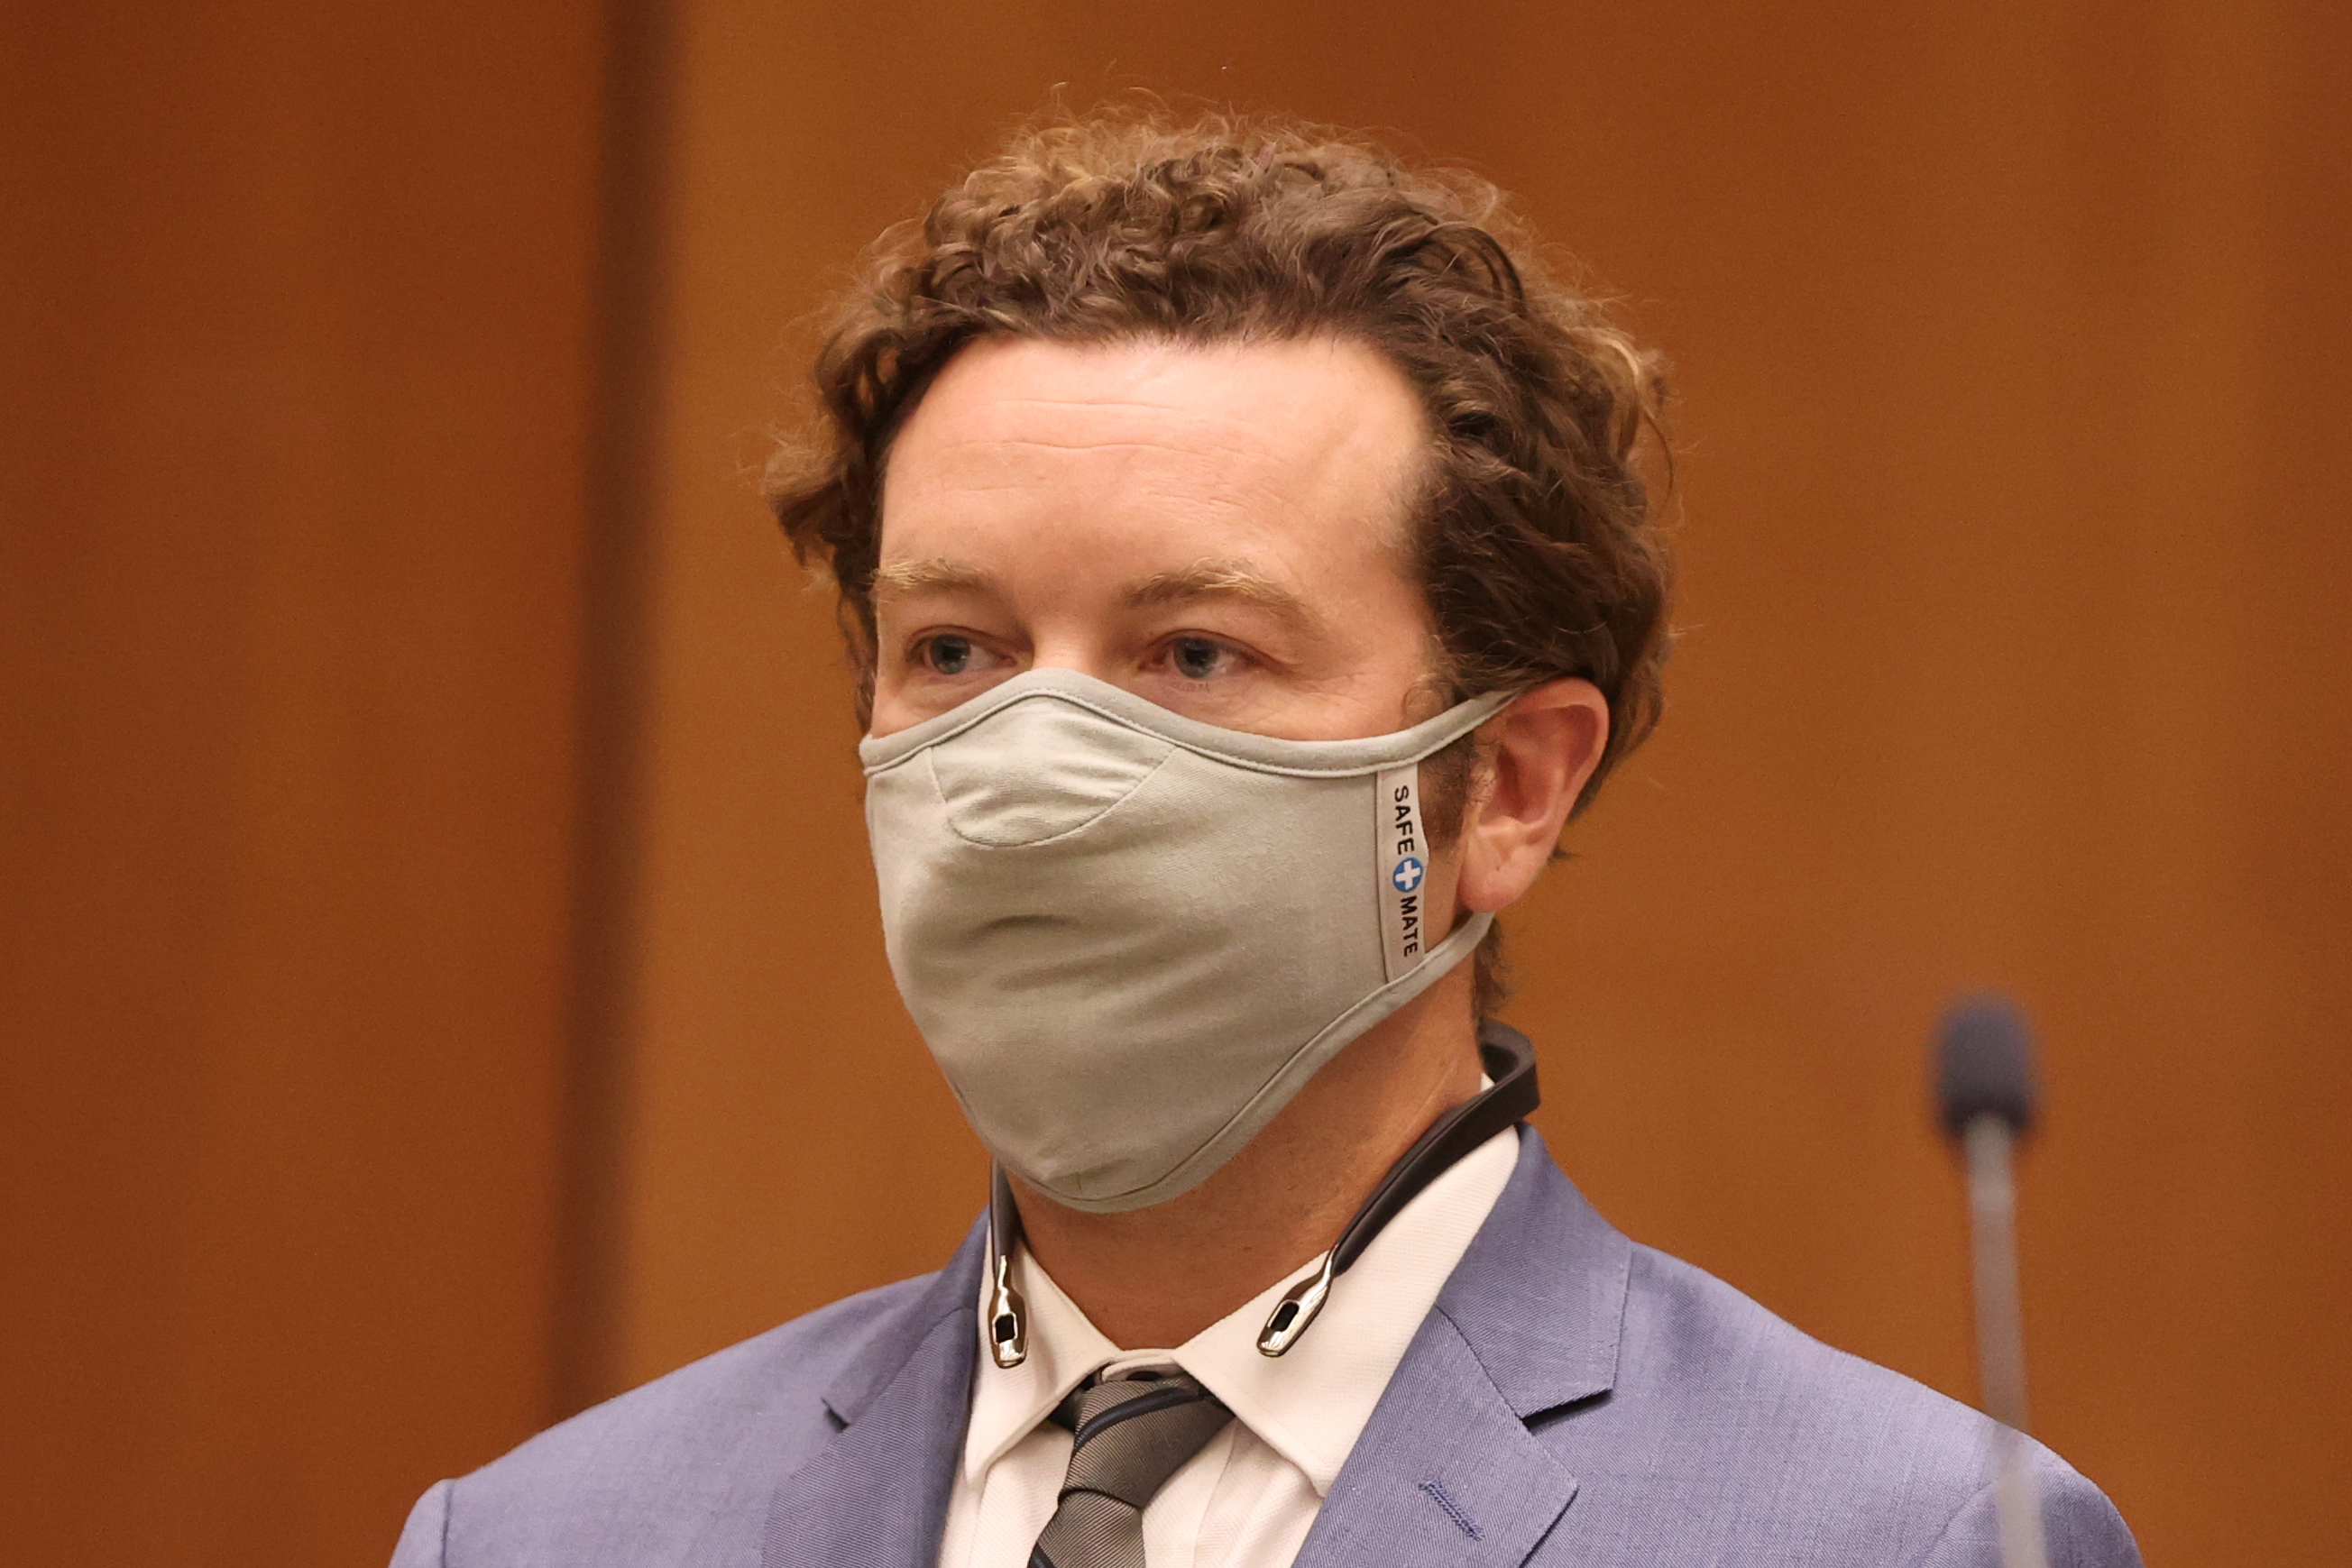 Danny Masterson wearing a face mask in court